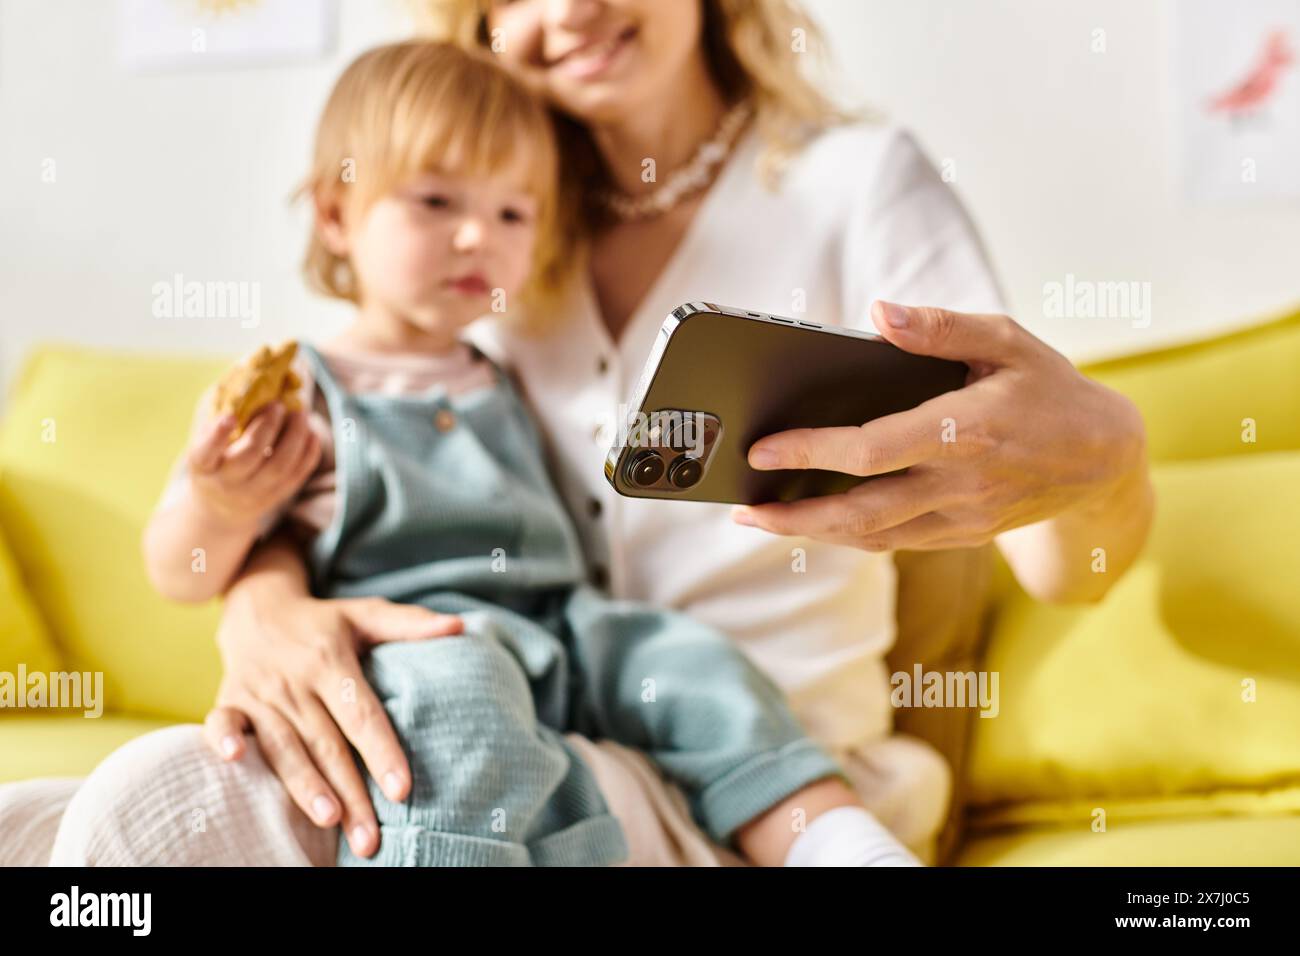 A curly mother holds a cell phone next to her toddler daughter at home, engaging in a heartwarming moment of connection. Stock Photo